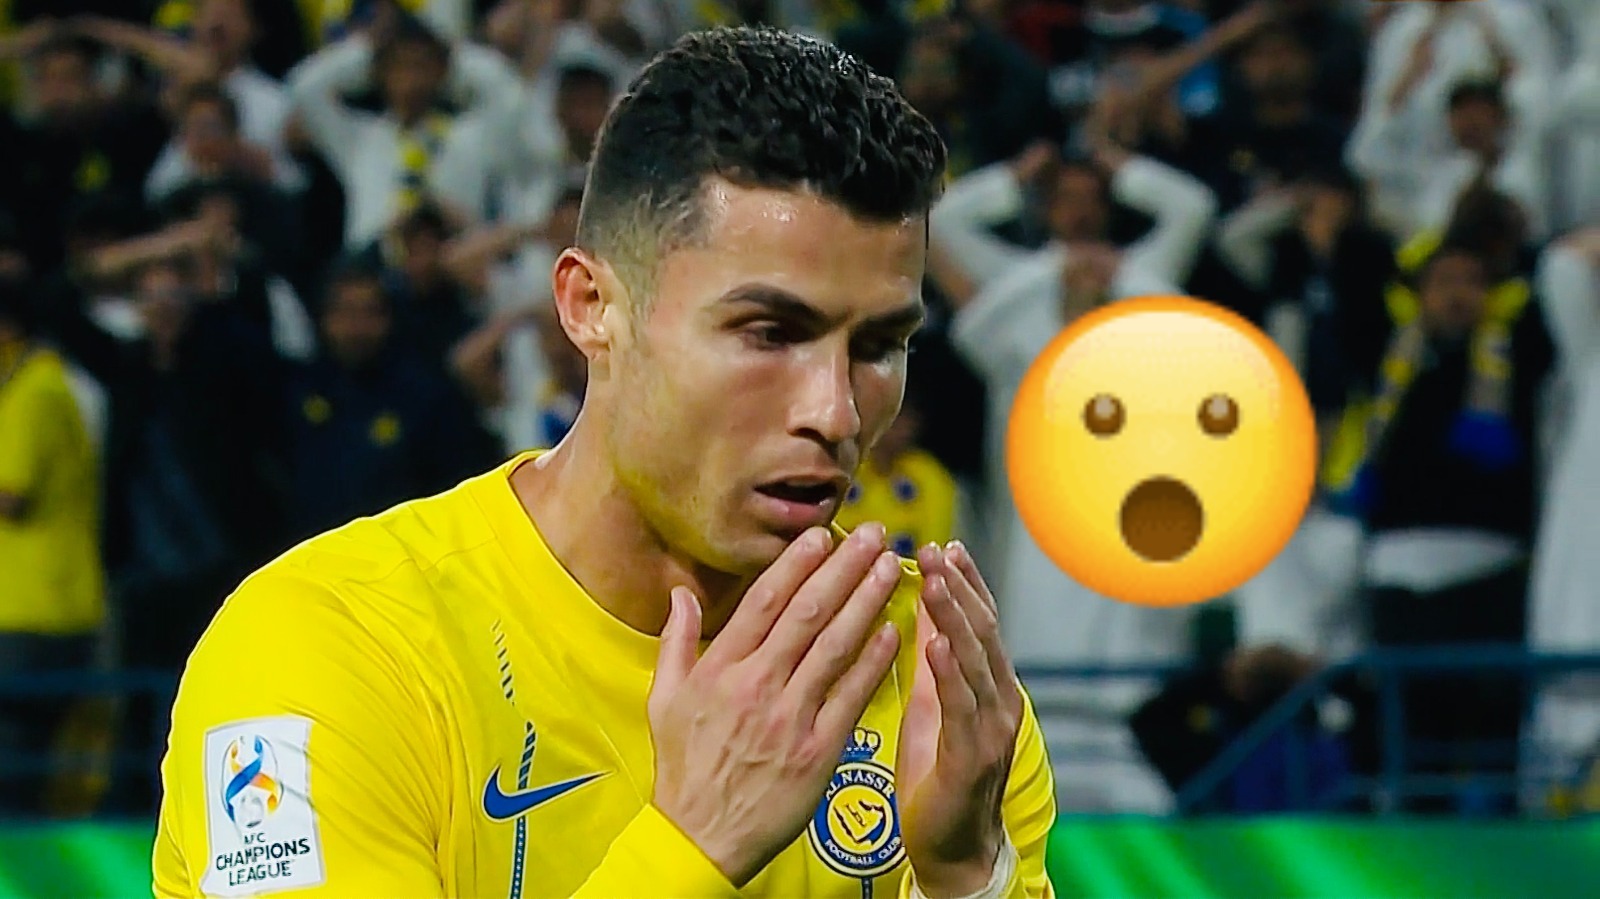 WOW! Ronaldo Misses Sitter From 3 Yards